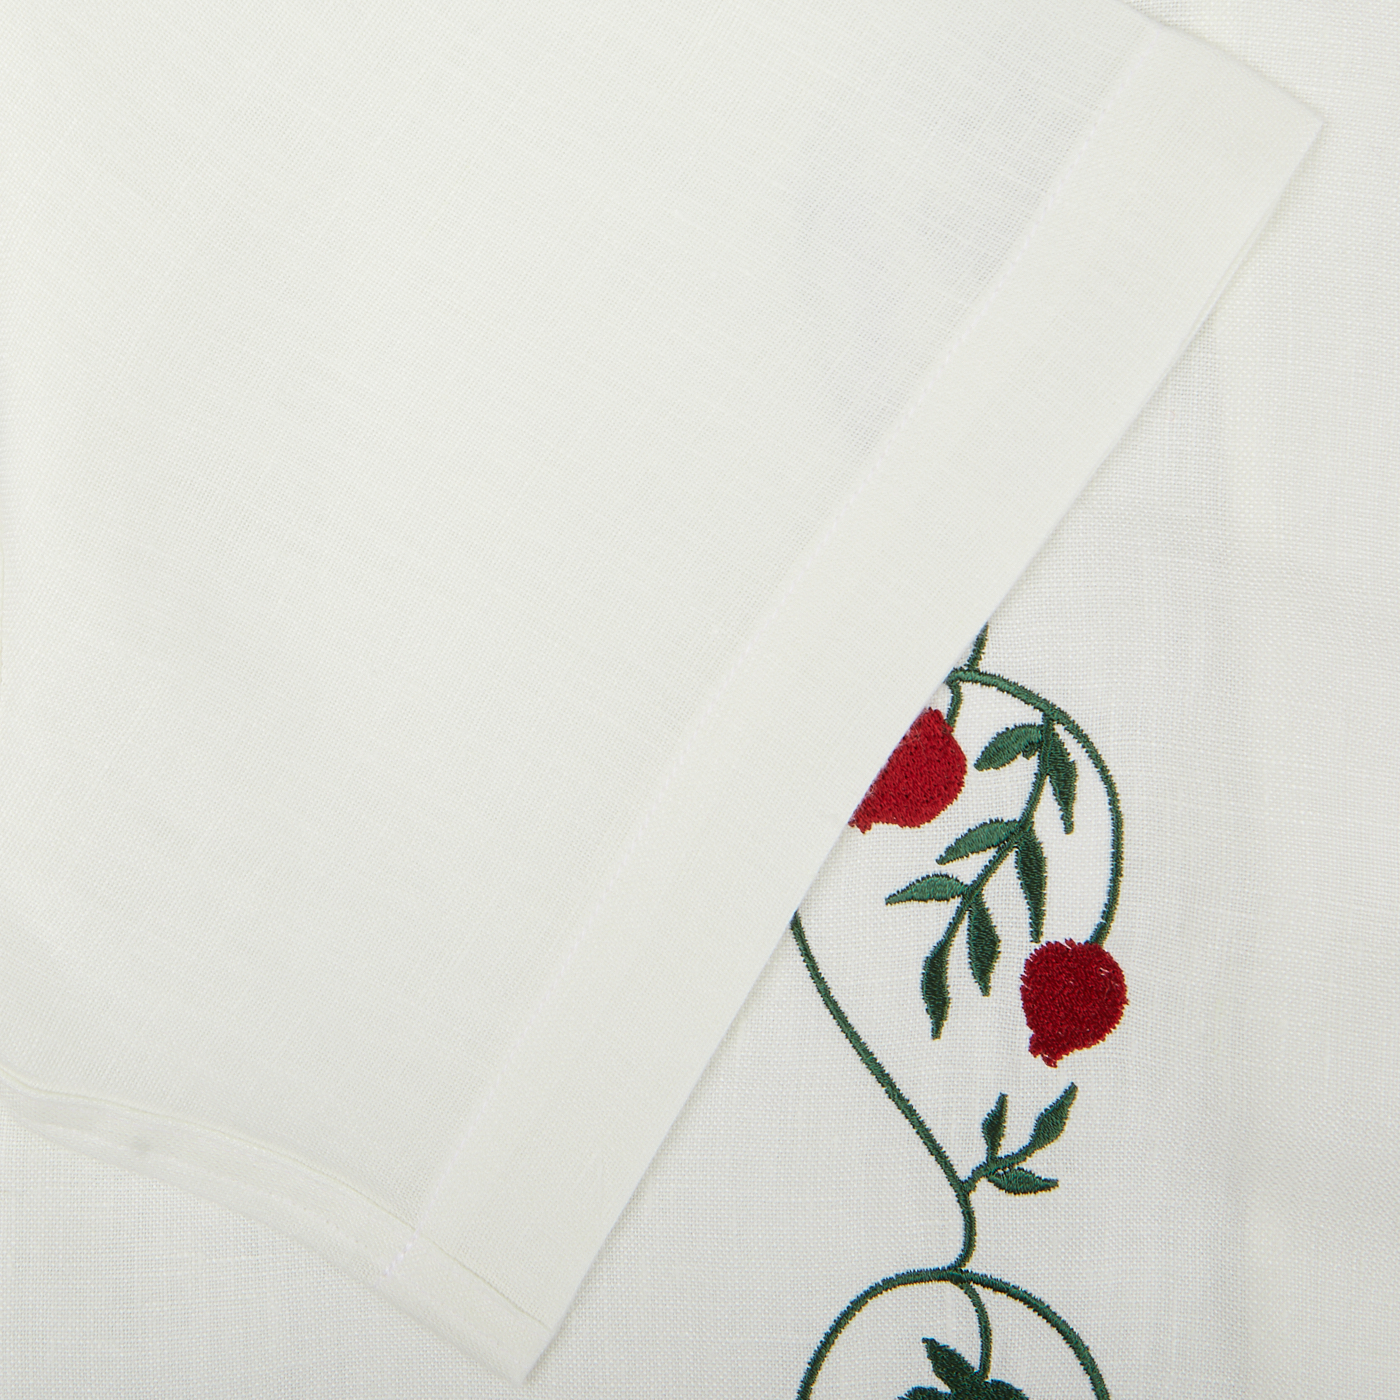 Off White Linen Floral Embroidered Shirt folded on a table, decorated with an embroidered design featuring red flowers and green leaves at one corner by De Bonne Facture.